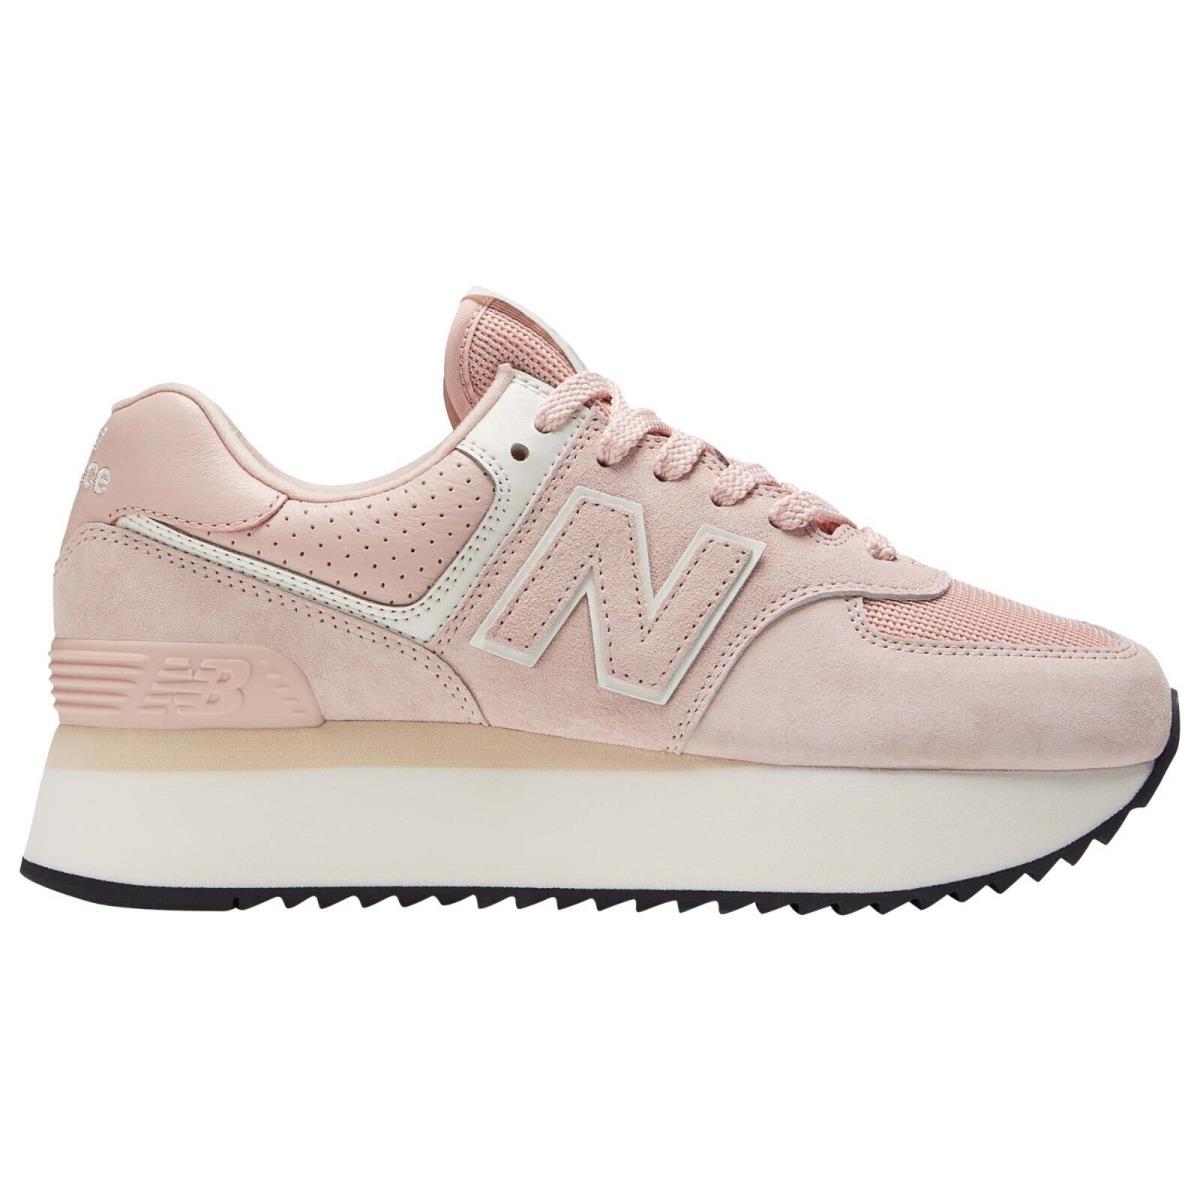 New Balance 574 Stacked Women`s Casual Shoes Pink US Sizes 6-11